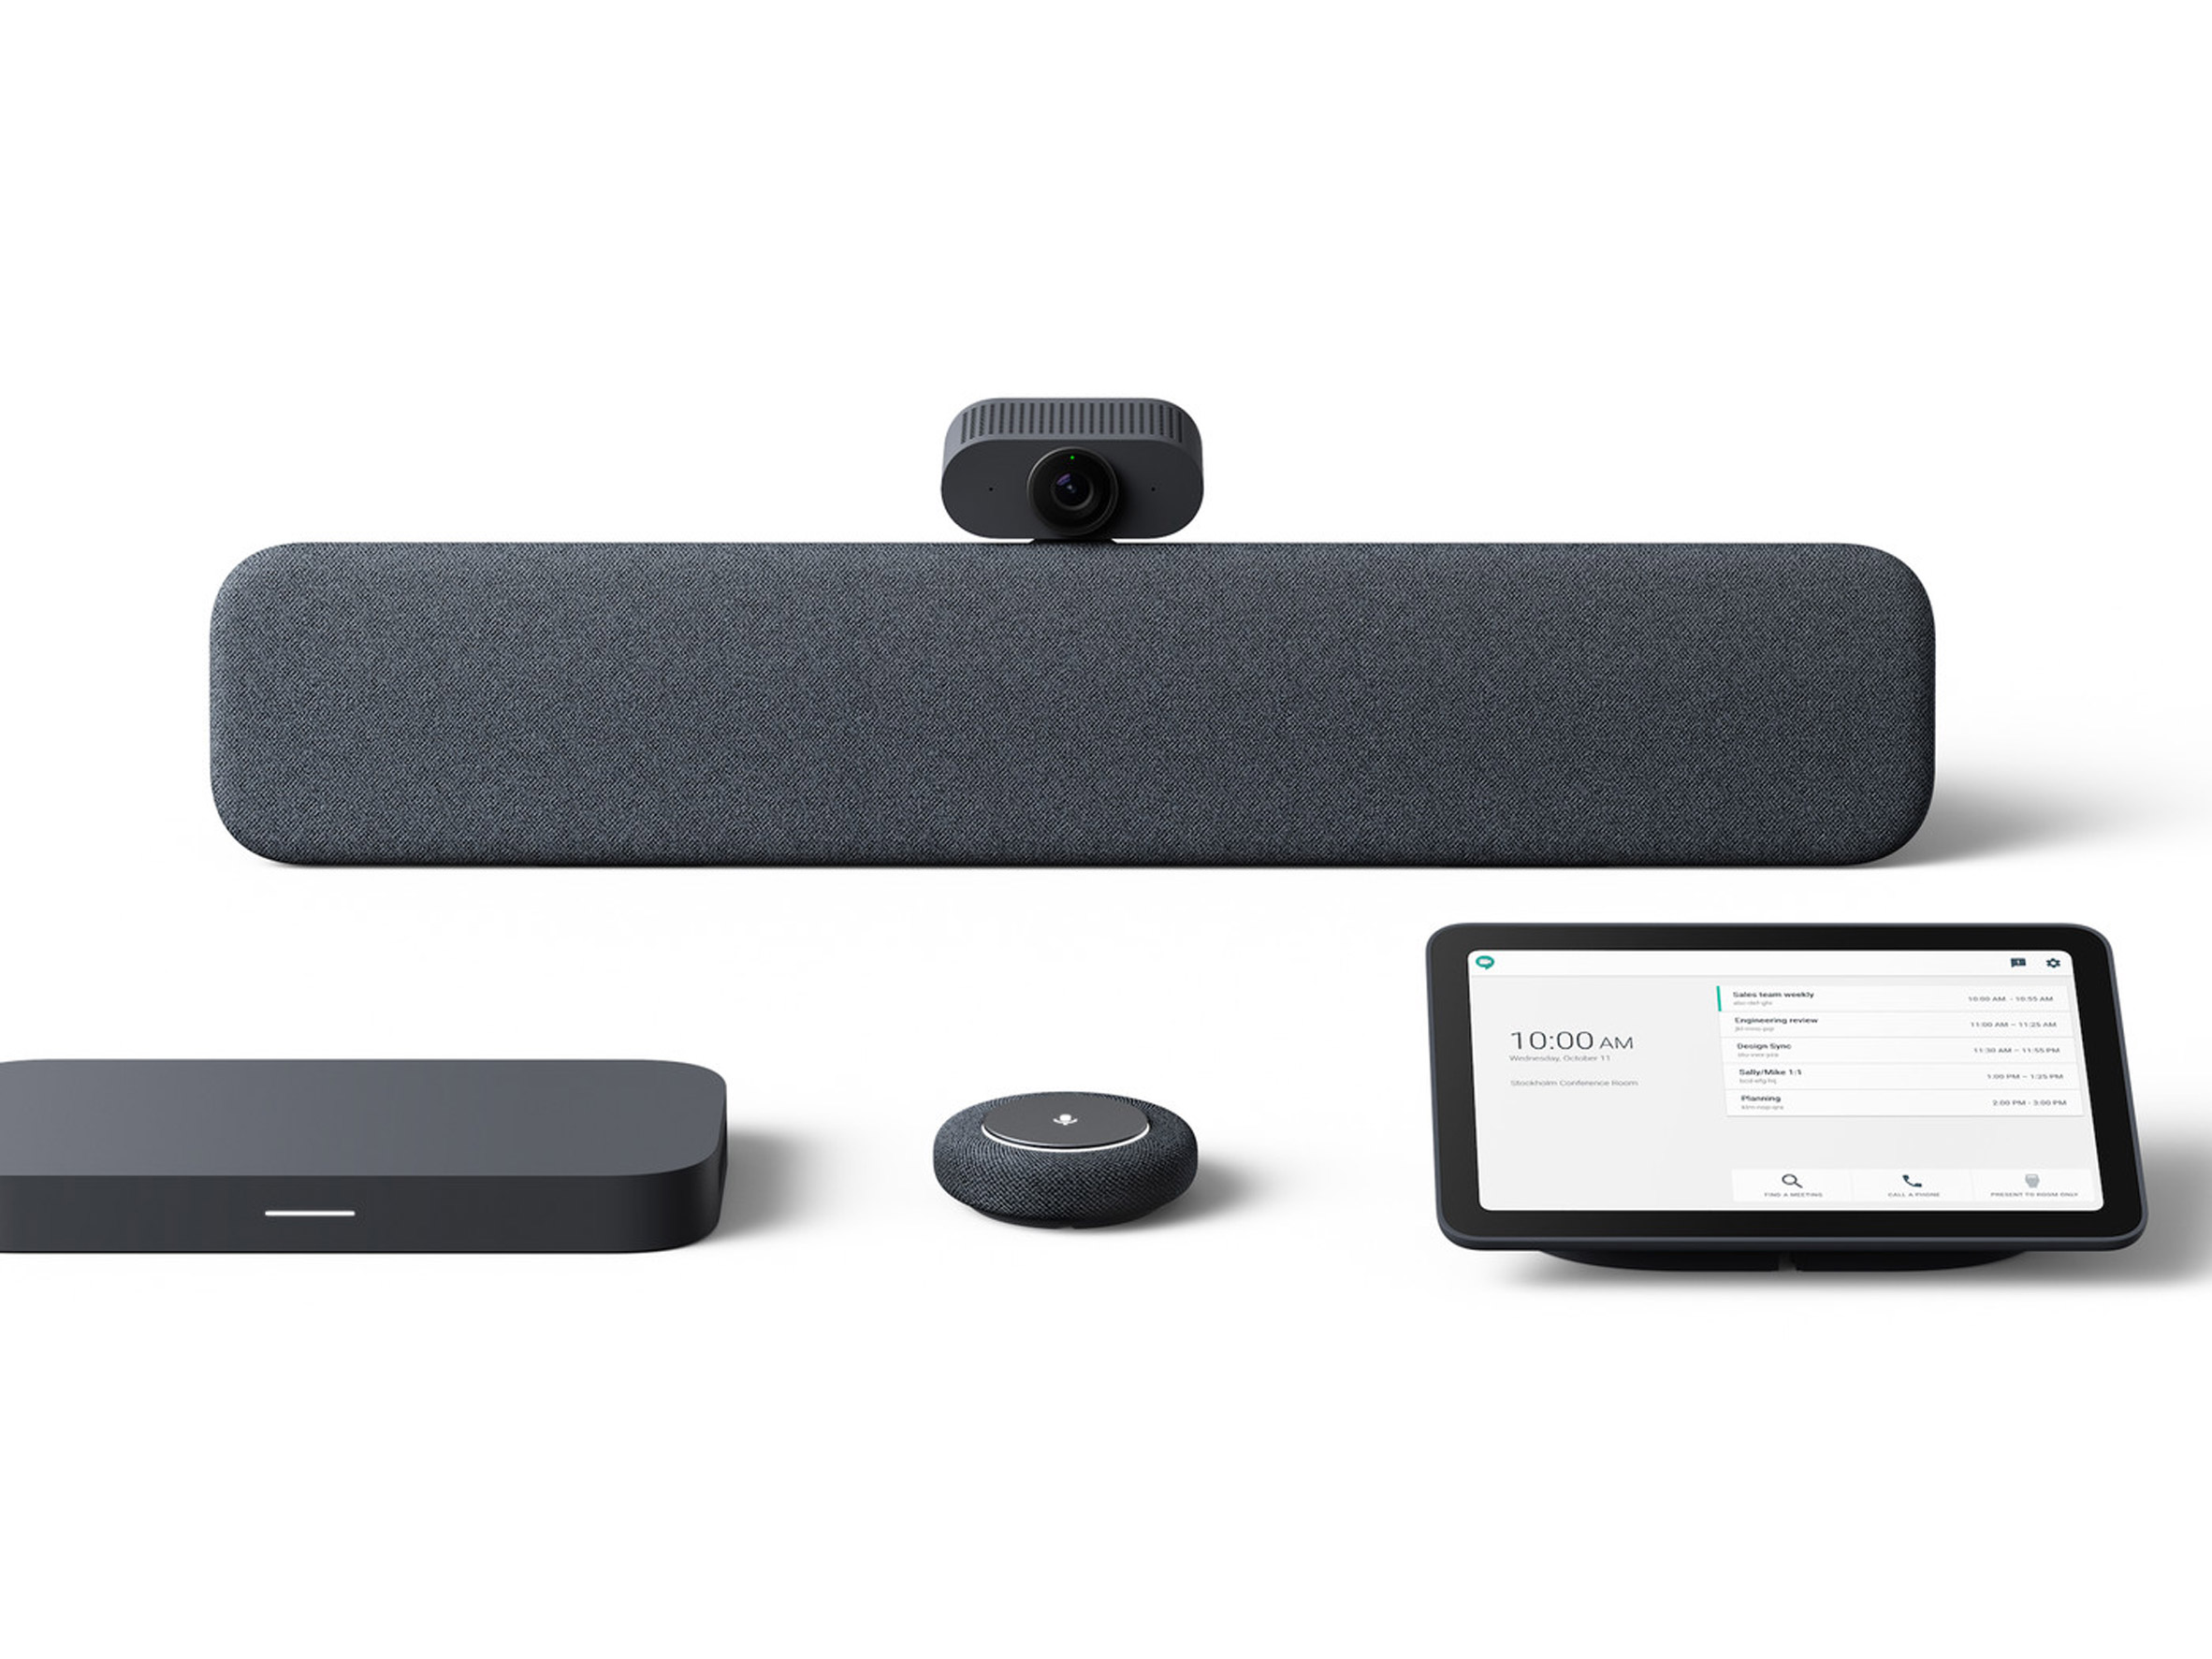 The Google Meet Series One system